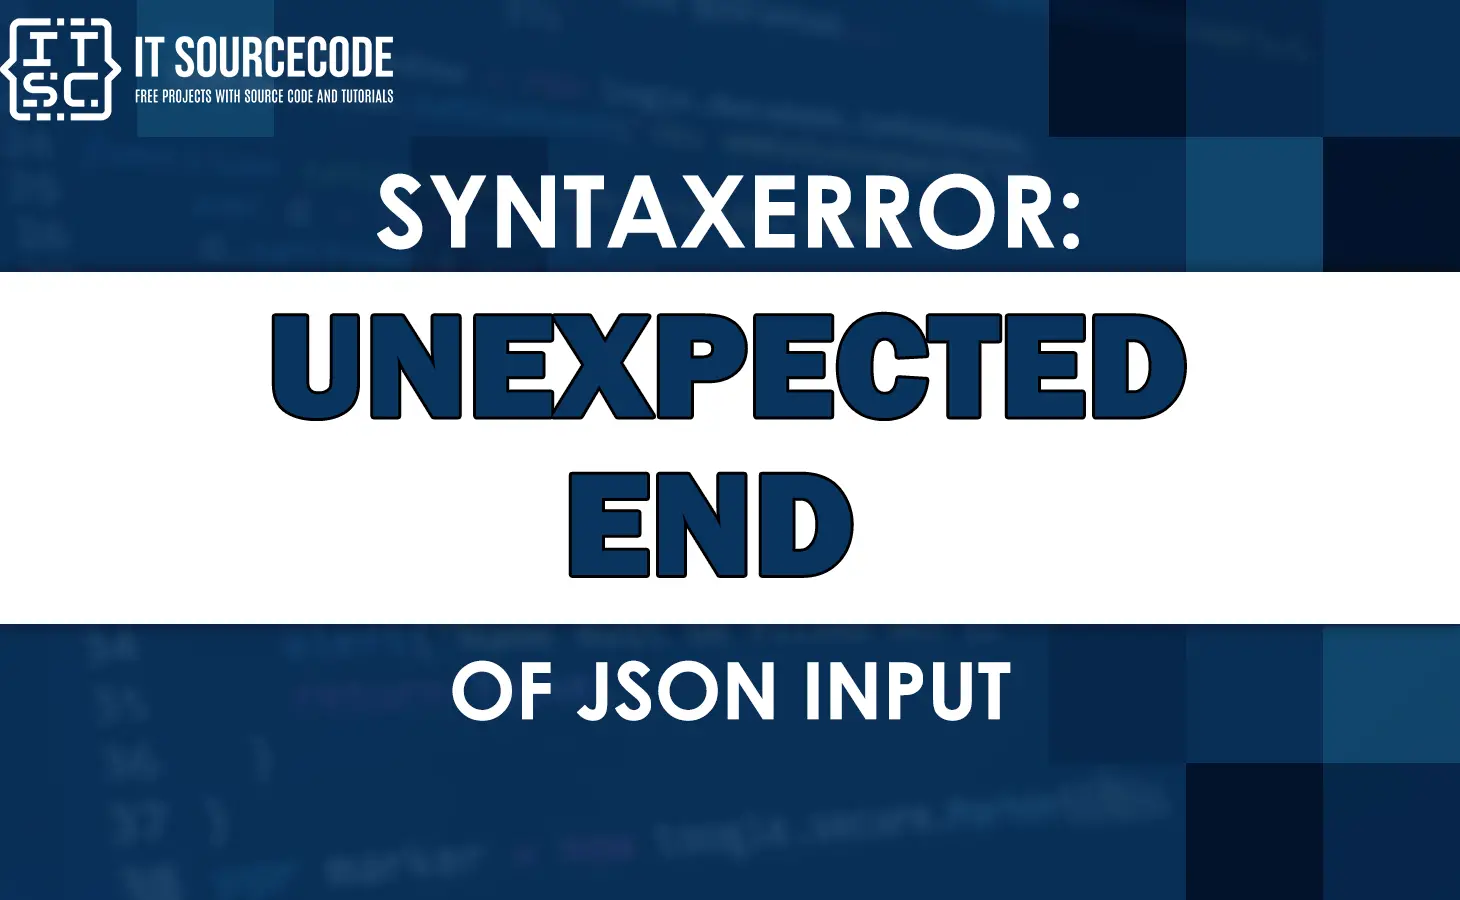 Syntaxerror: unexpected end of json input